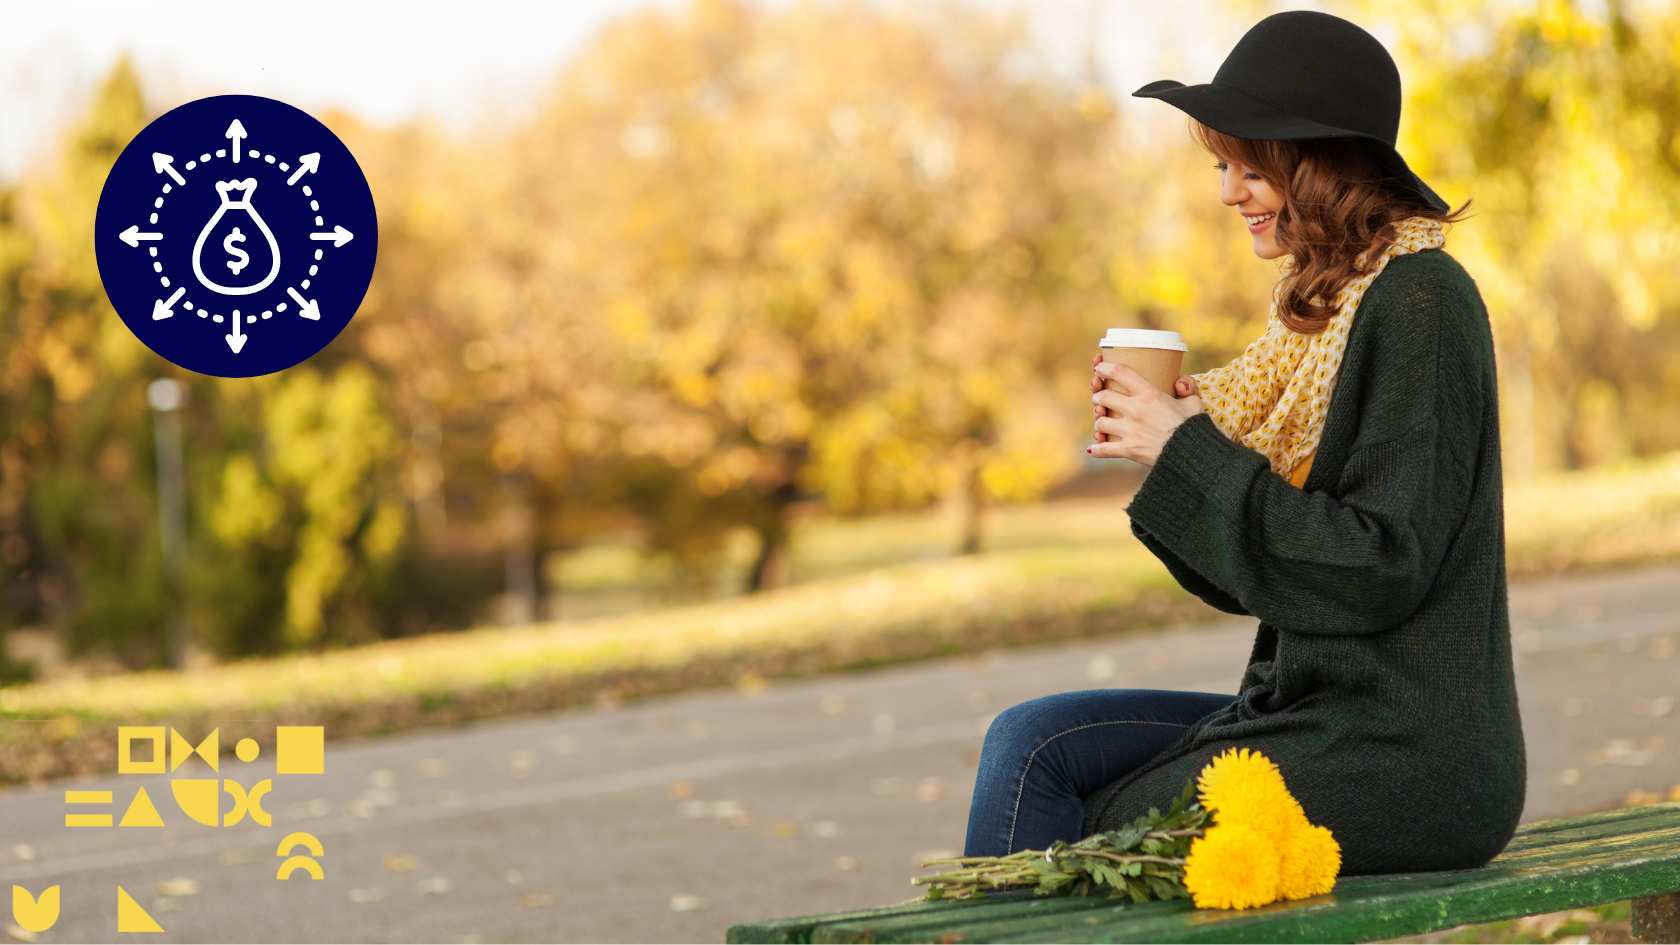 Image of a woman sitting on a bench in a park during autumn. She is holding a to-go coffee cup and has a bouquet of flowers next to her, representing a little treat to get through the day. Overlaid is an icon of a bag of money and arrows to represent allocating money.